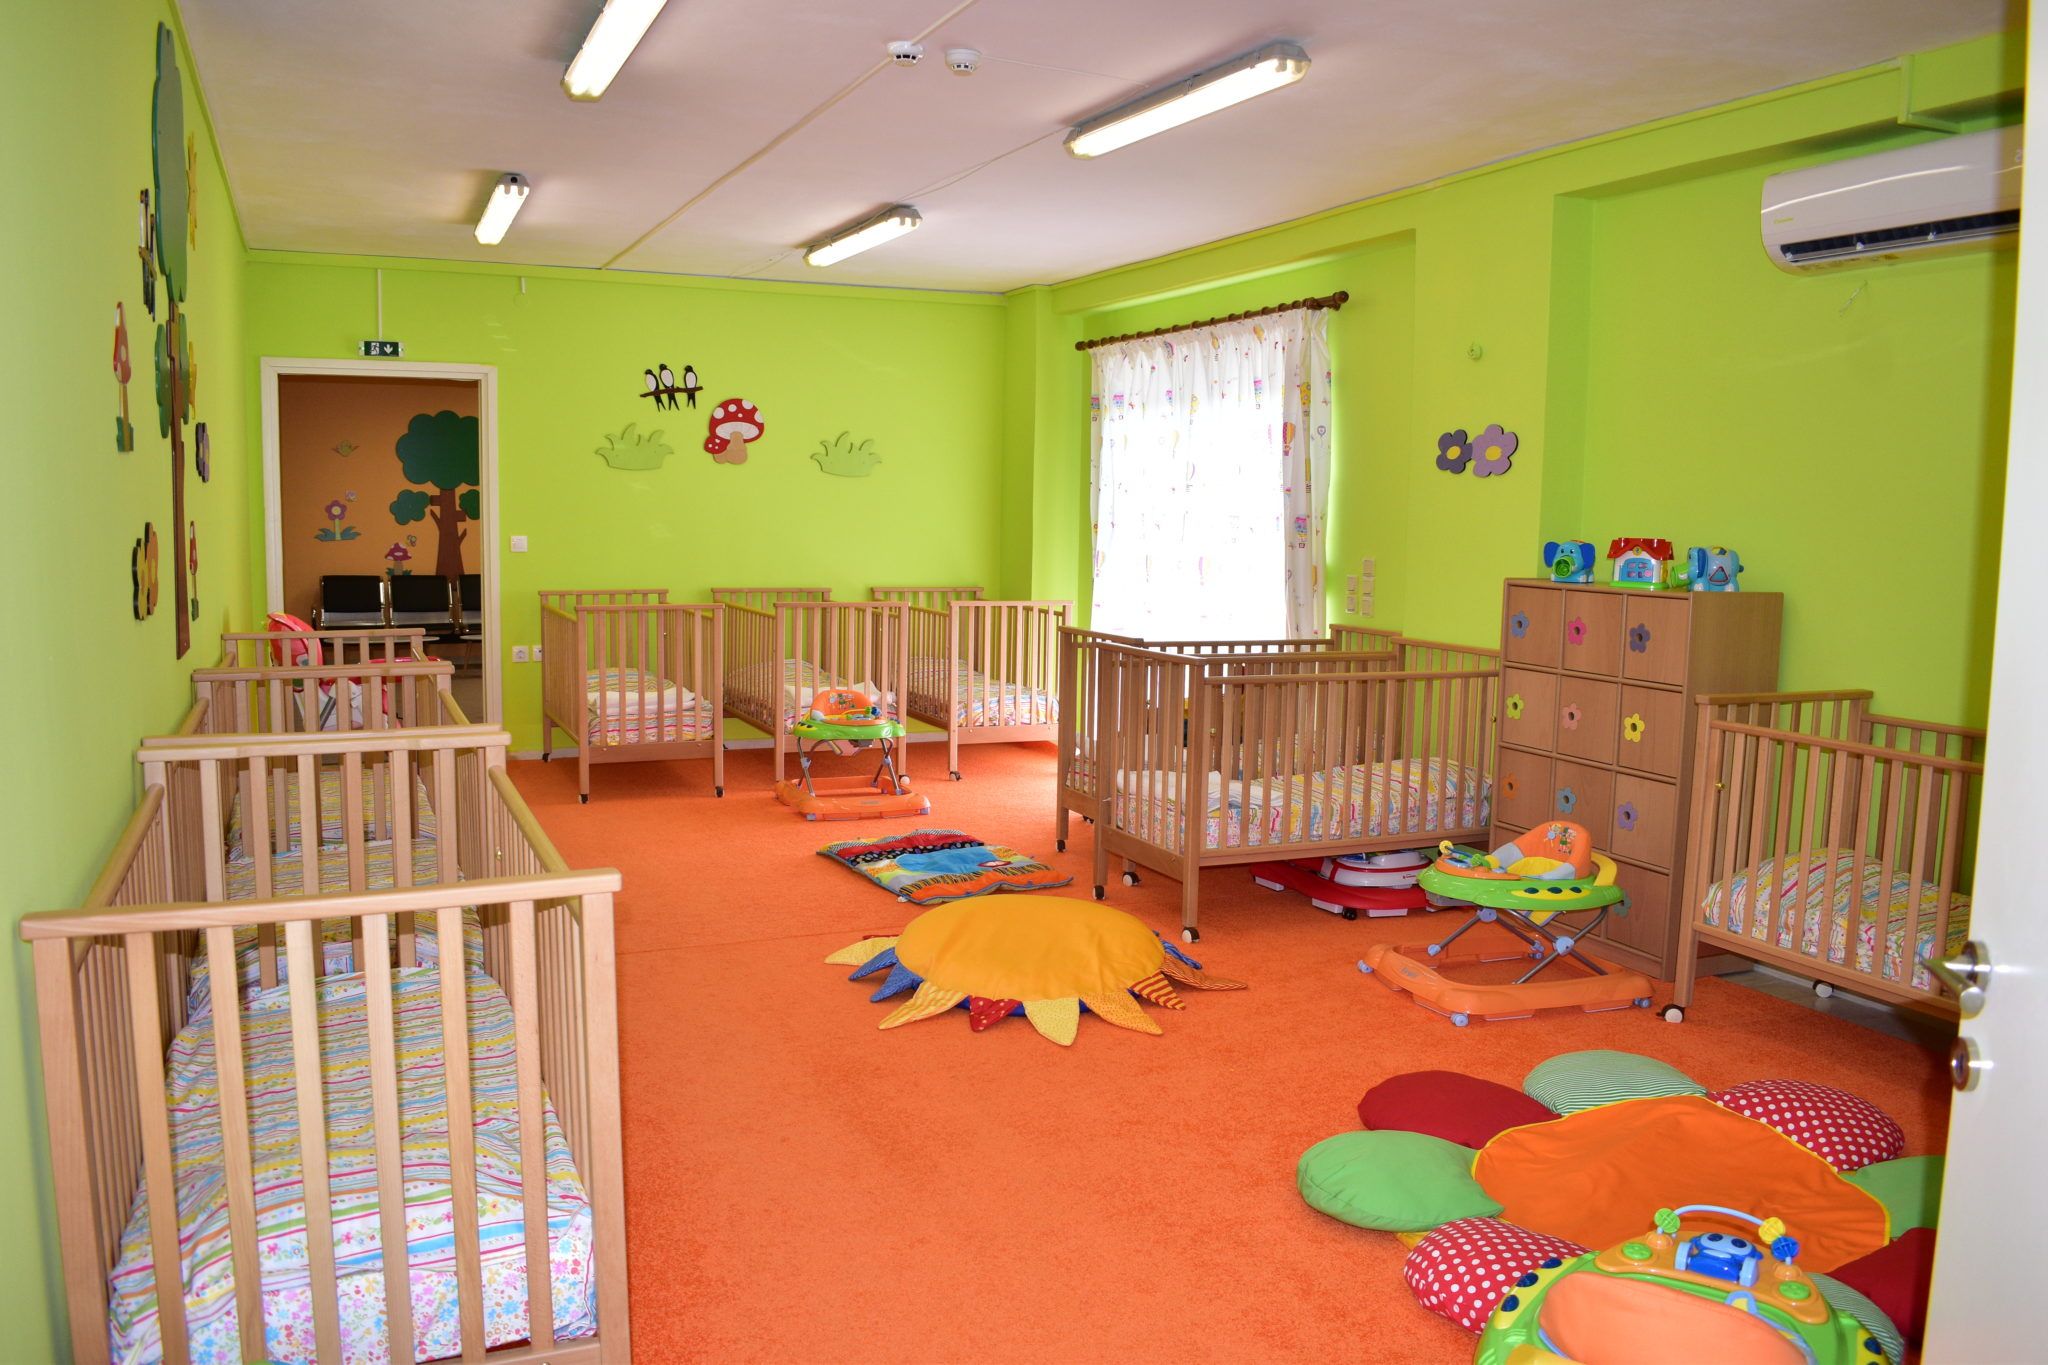 One nursery and two childcare centres closed due to Covid cases